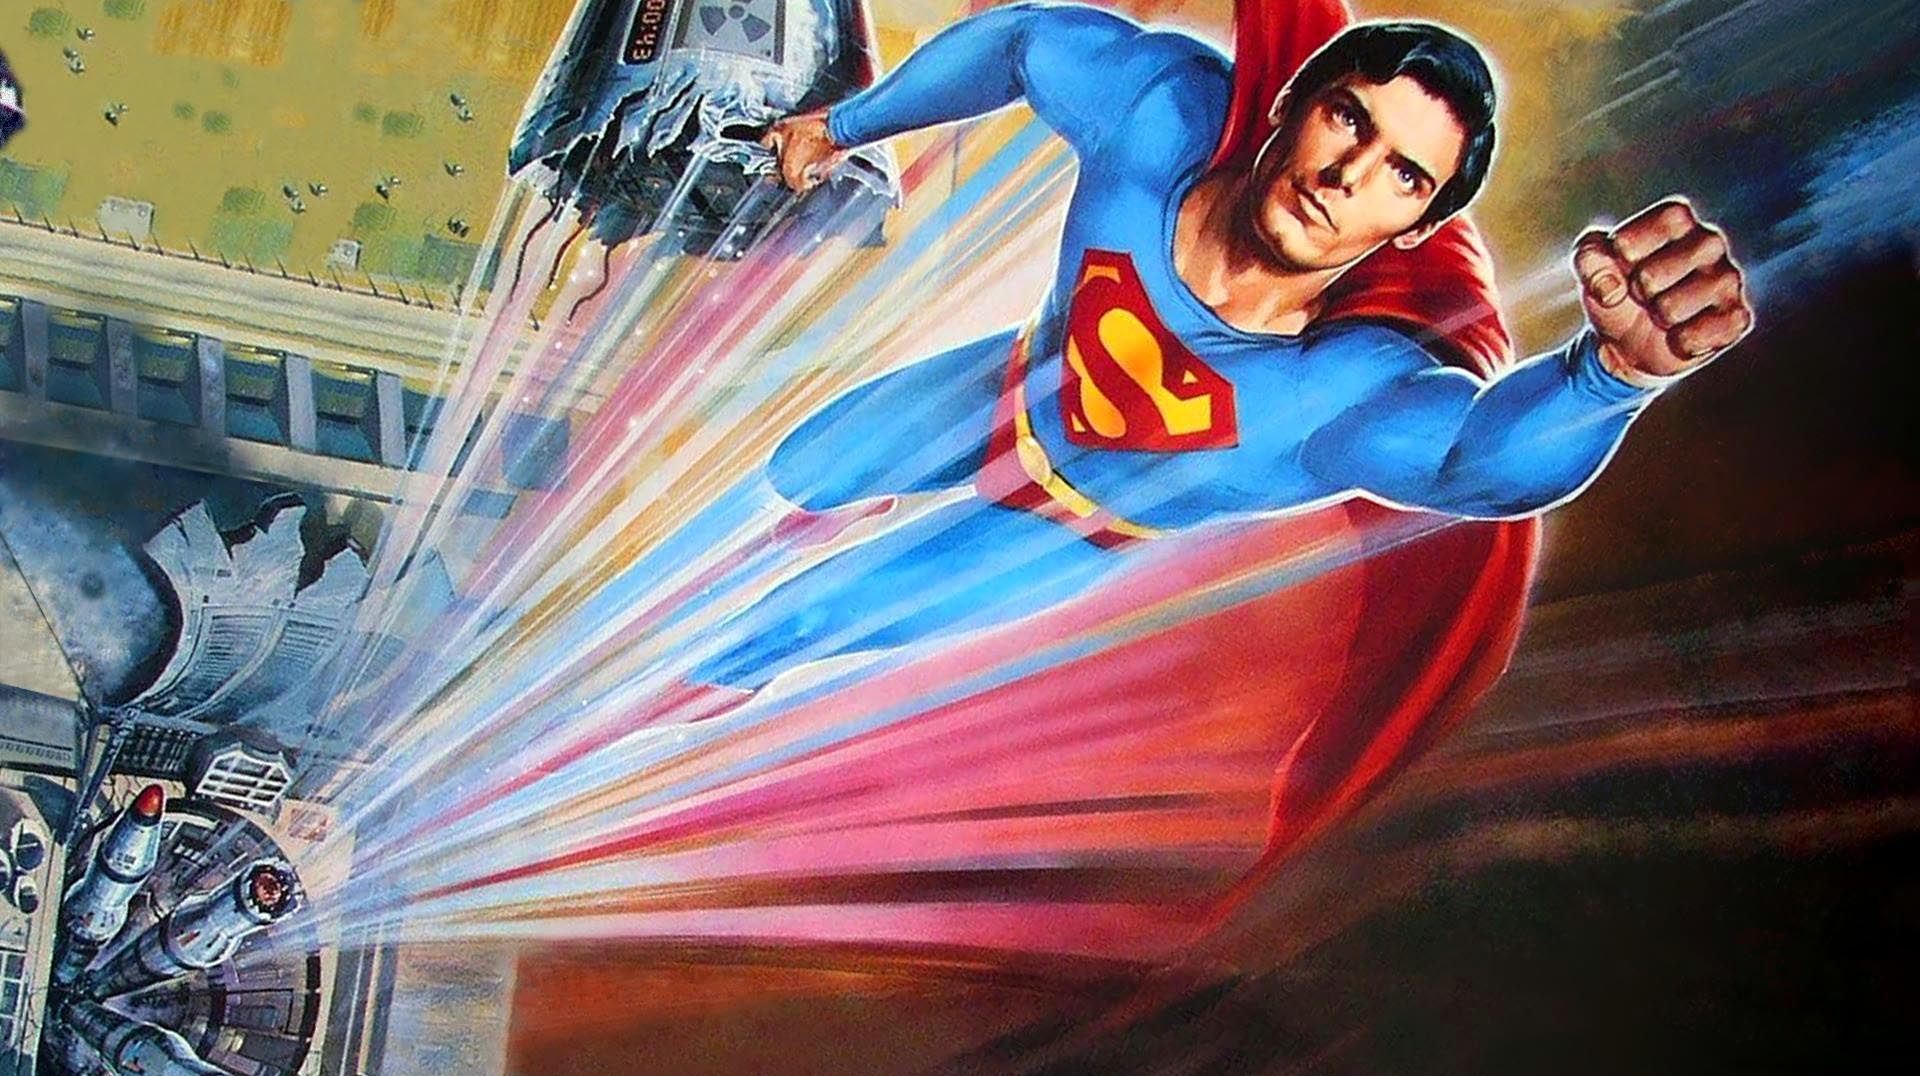 6. Superman IV: The Quest for Peace (1987)